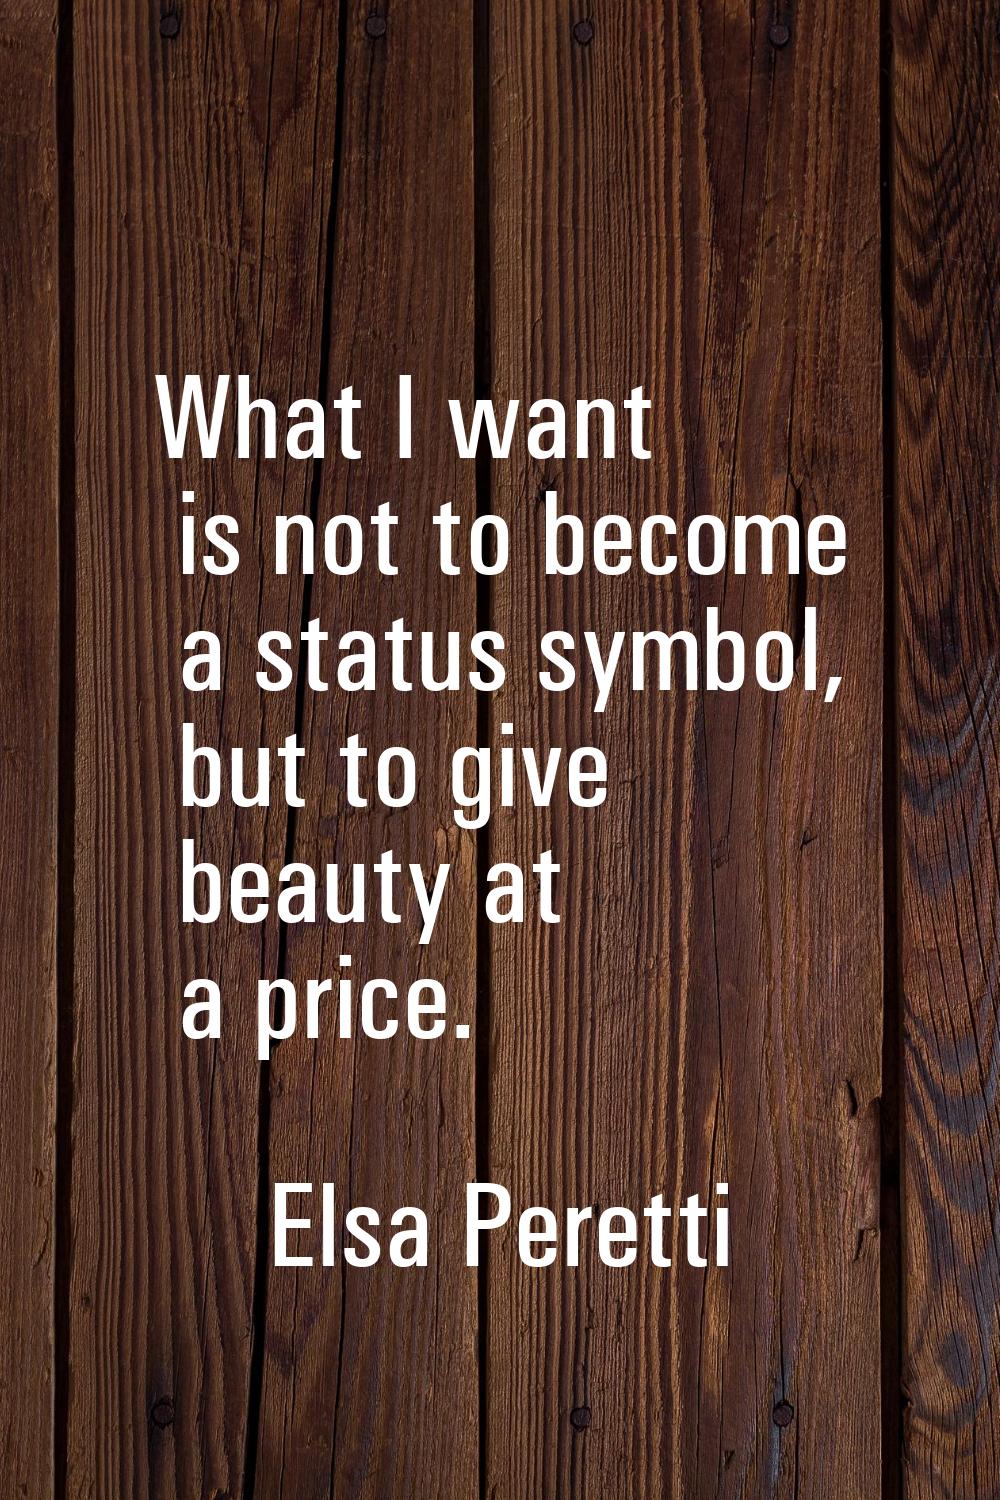 What I want is not to become a status symbol, but to give beauty at a price.